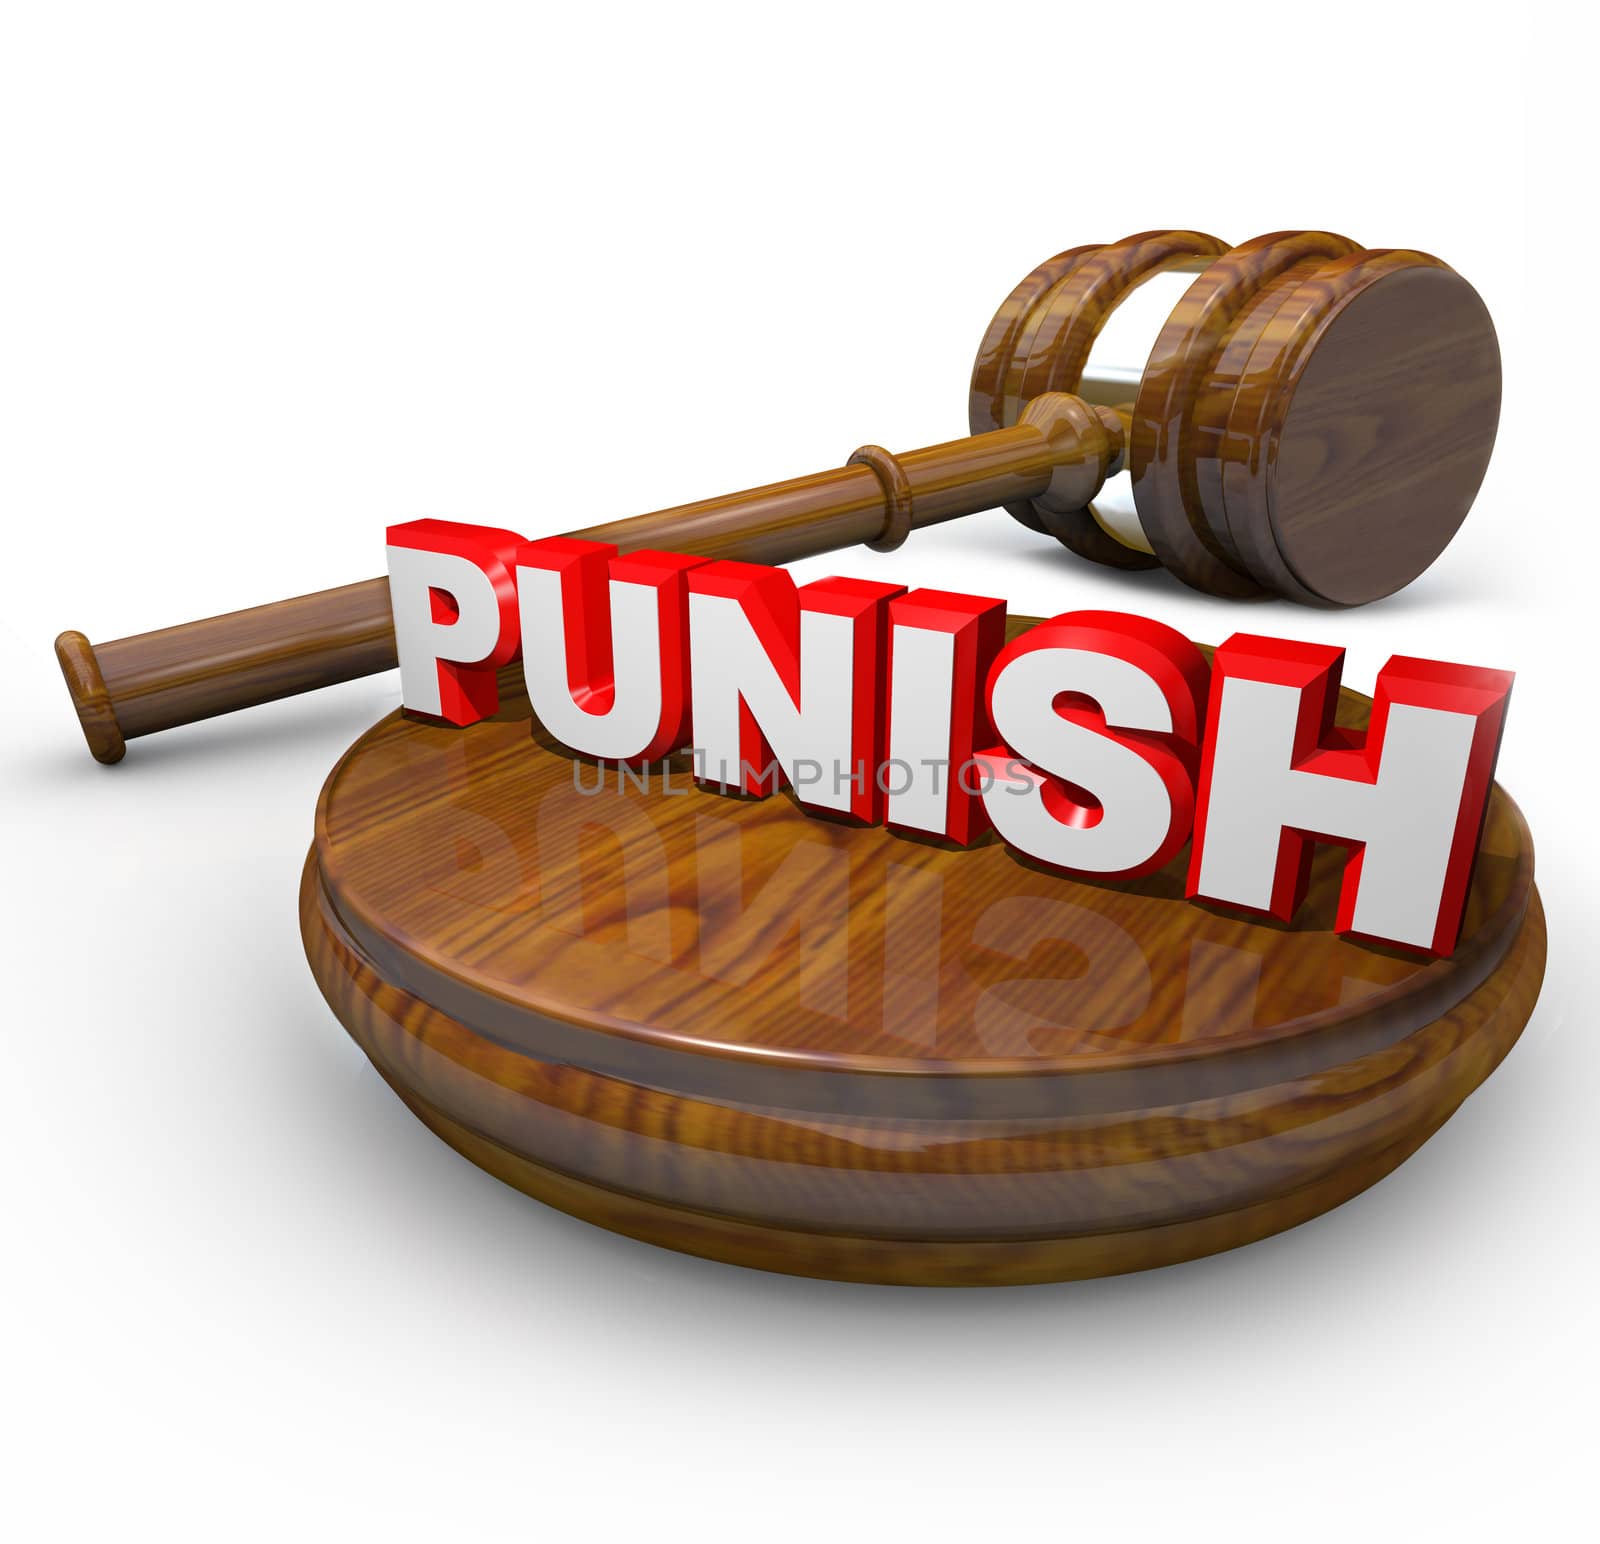 A judge's gavel and the word Punish, symbolizing the hearing of an argument for a defendant who is found guilty and the decision of sentencing